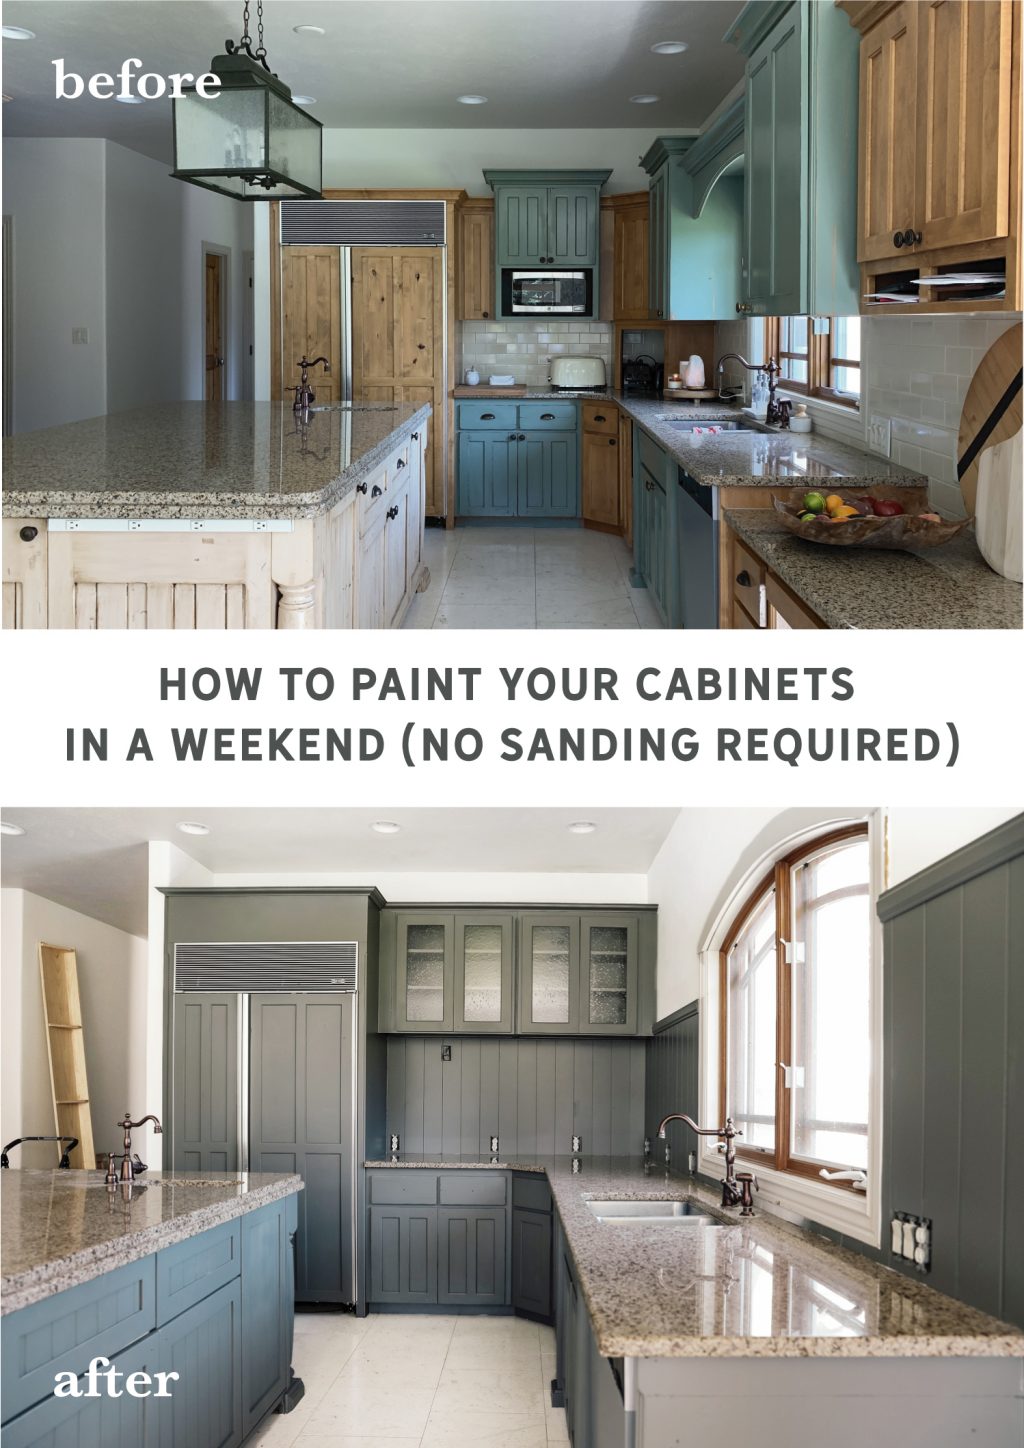 How To Paint Your Cabinets In A Weekend Without Sanding Them Chris Loves Julia,How To Make Cabbage Soup For Weight Loss